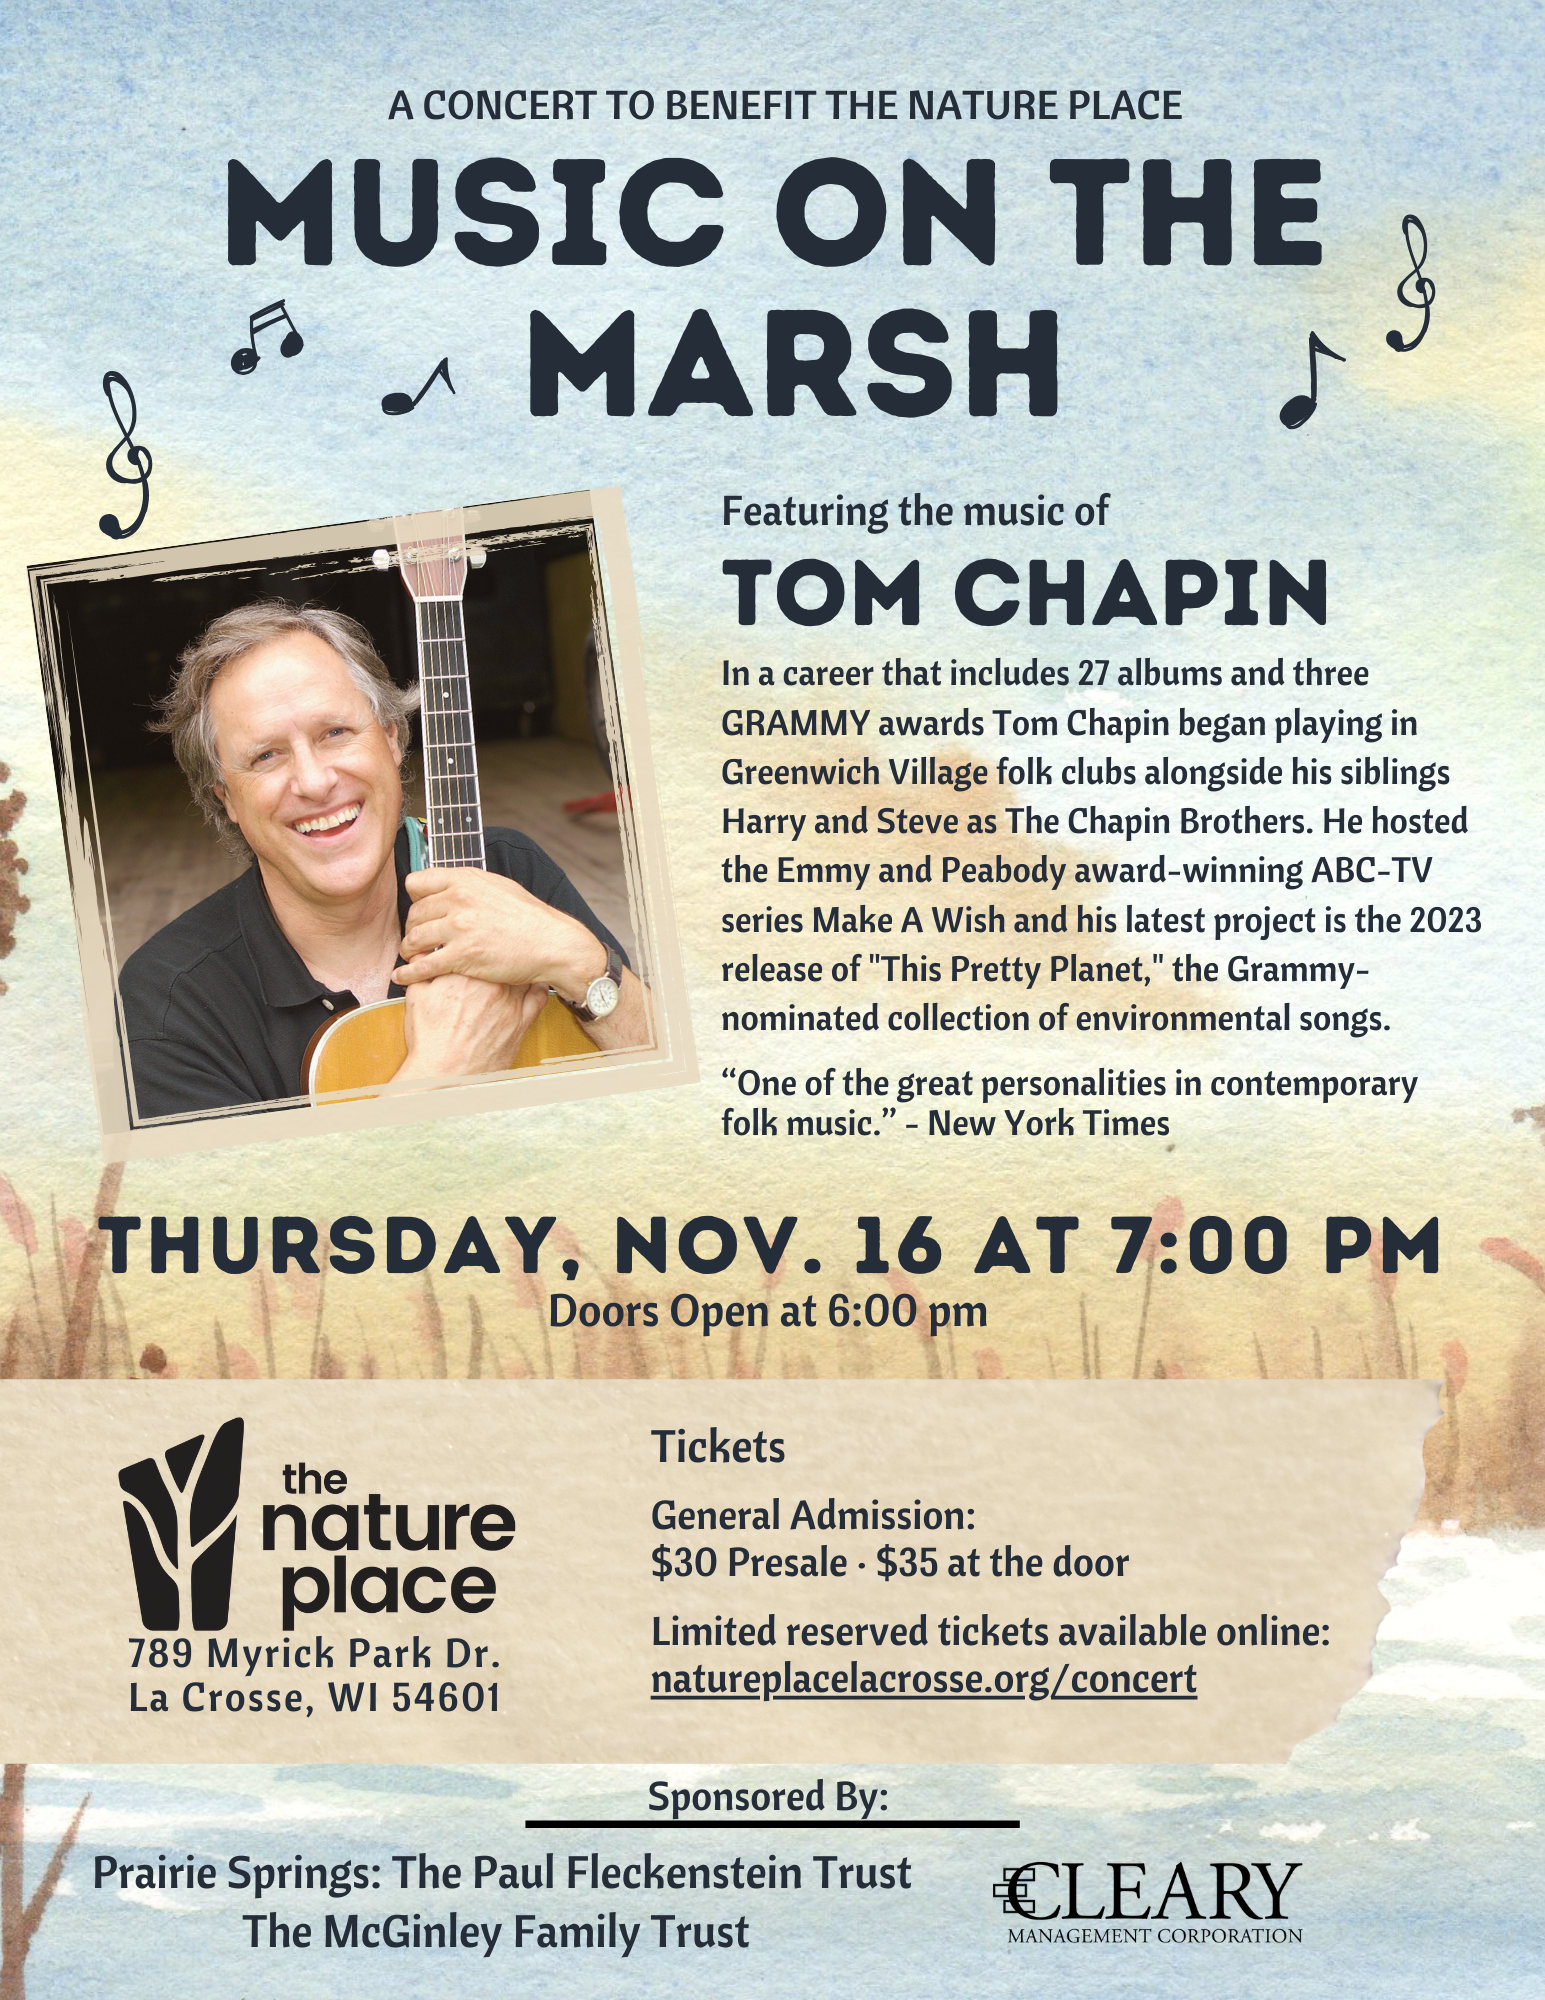 "A concert to benefit The Nature Place, Music on the Marsh featuring the music of Tom Chapin. Thursday, November 16 at 7pm. Doors open at 6pm. Tickets General Admission $30 Presale - $35 at the door, Lmited reserved tickets available online: natureplacelacrosse.org/concert"